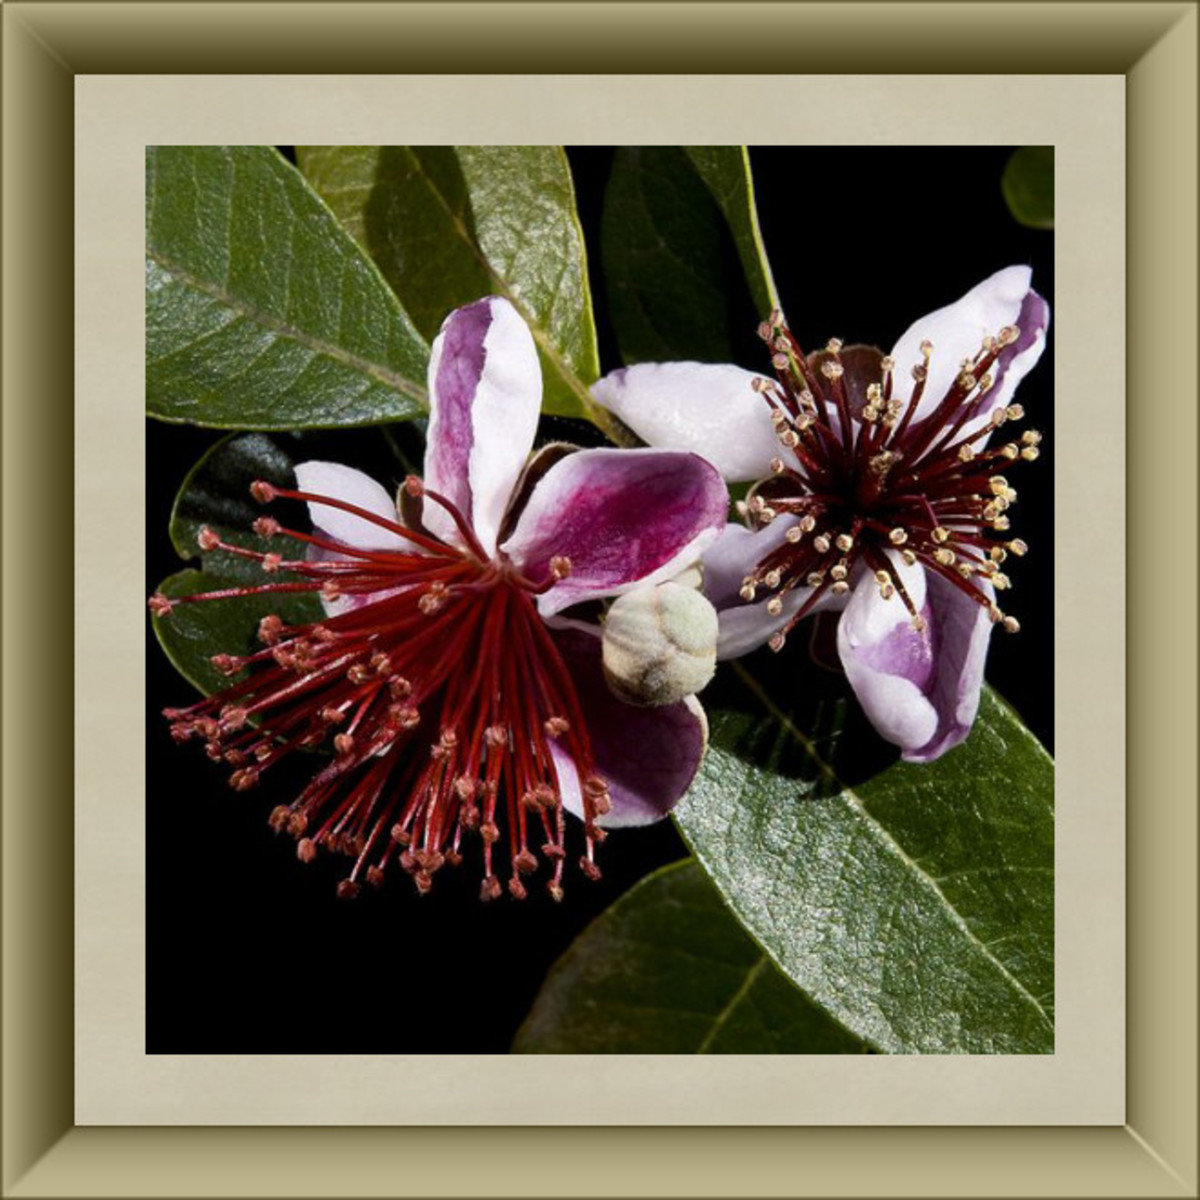 Pineapple Guava Blossoms